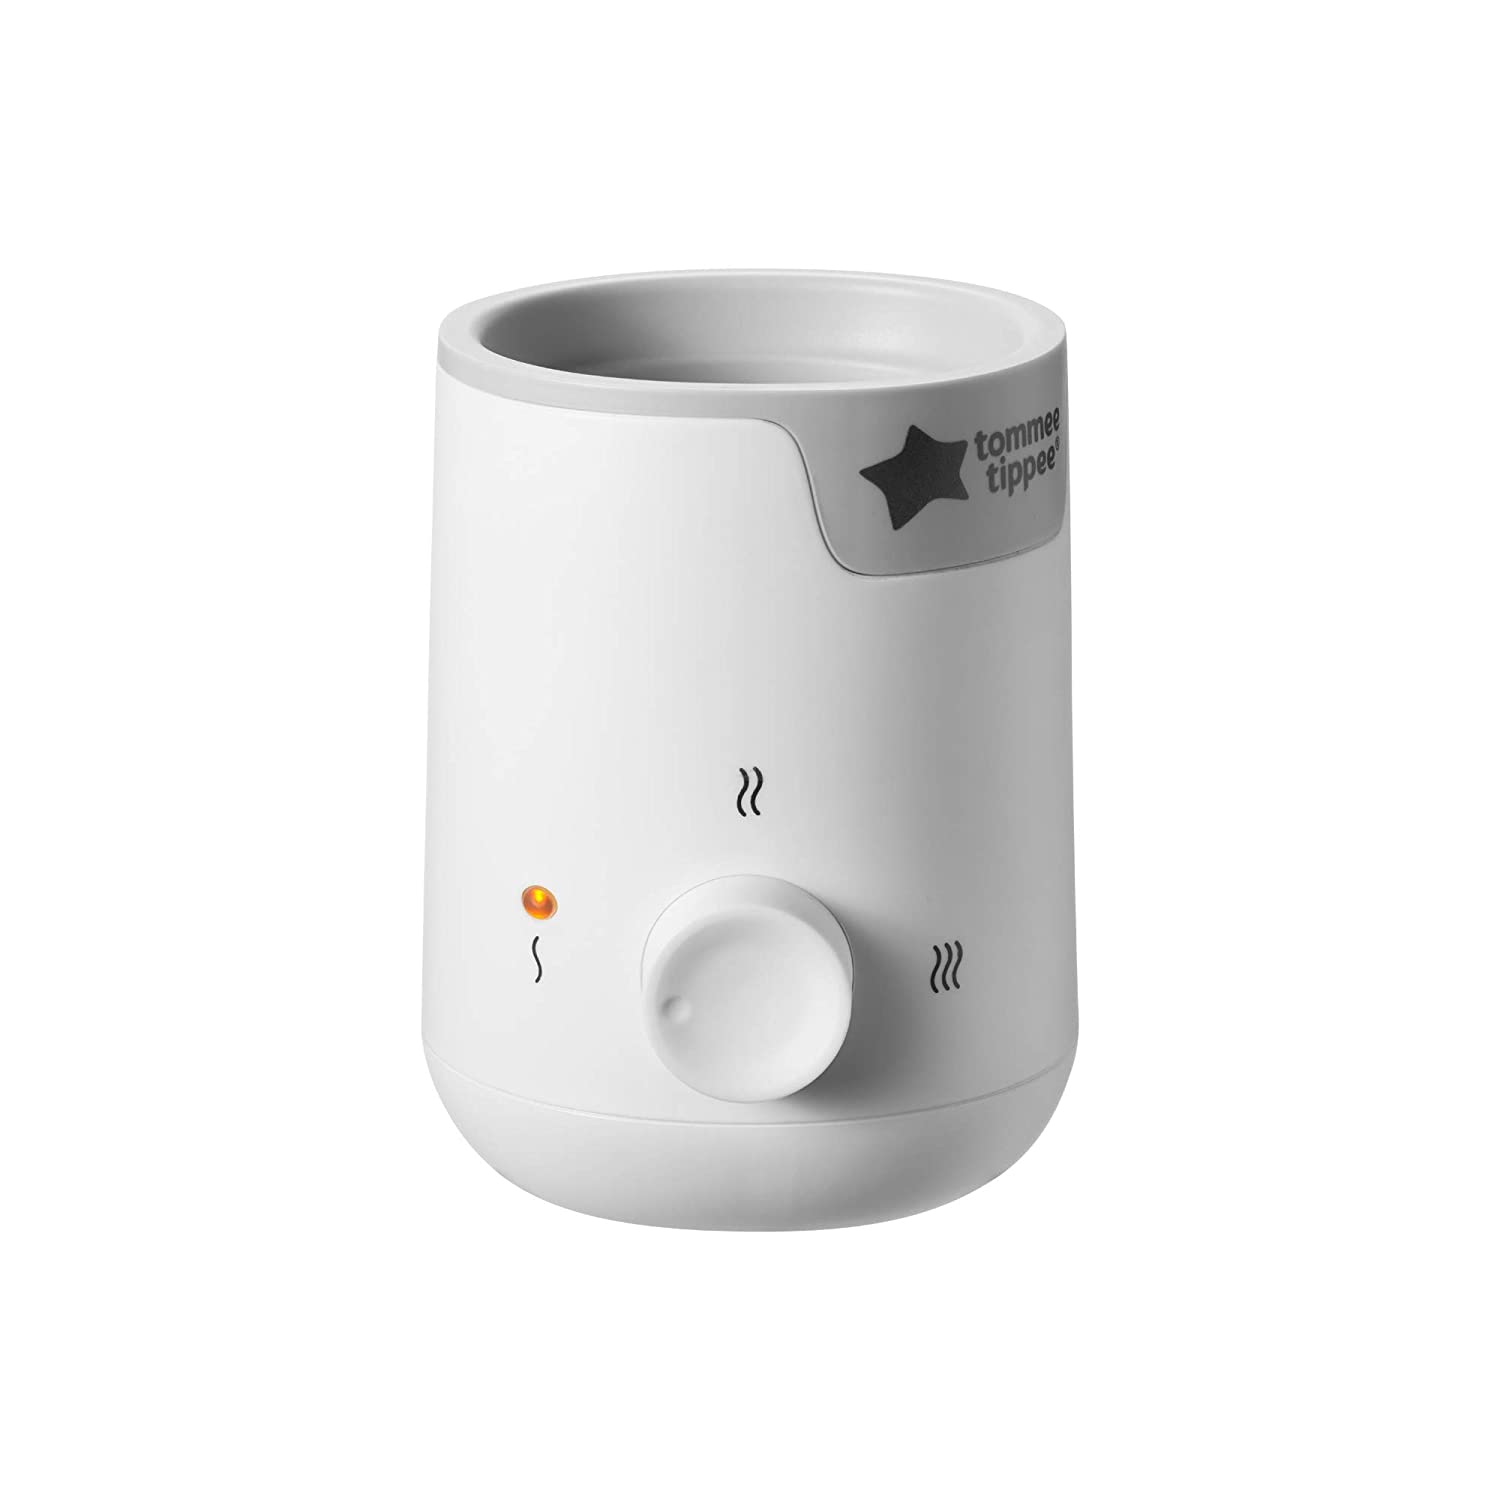 Tommee Tippee Easi-warm Baby Food Feeding Bottle and Warmer (White)